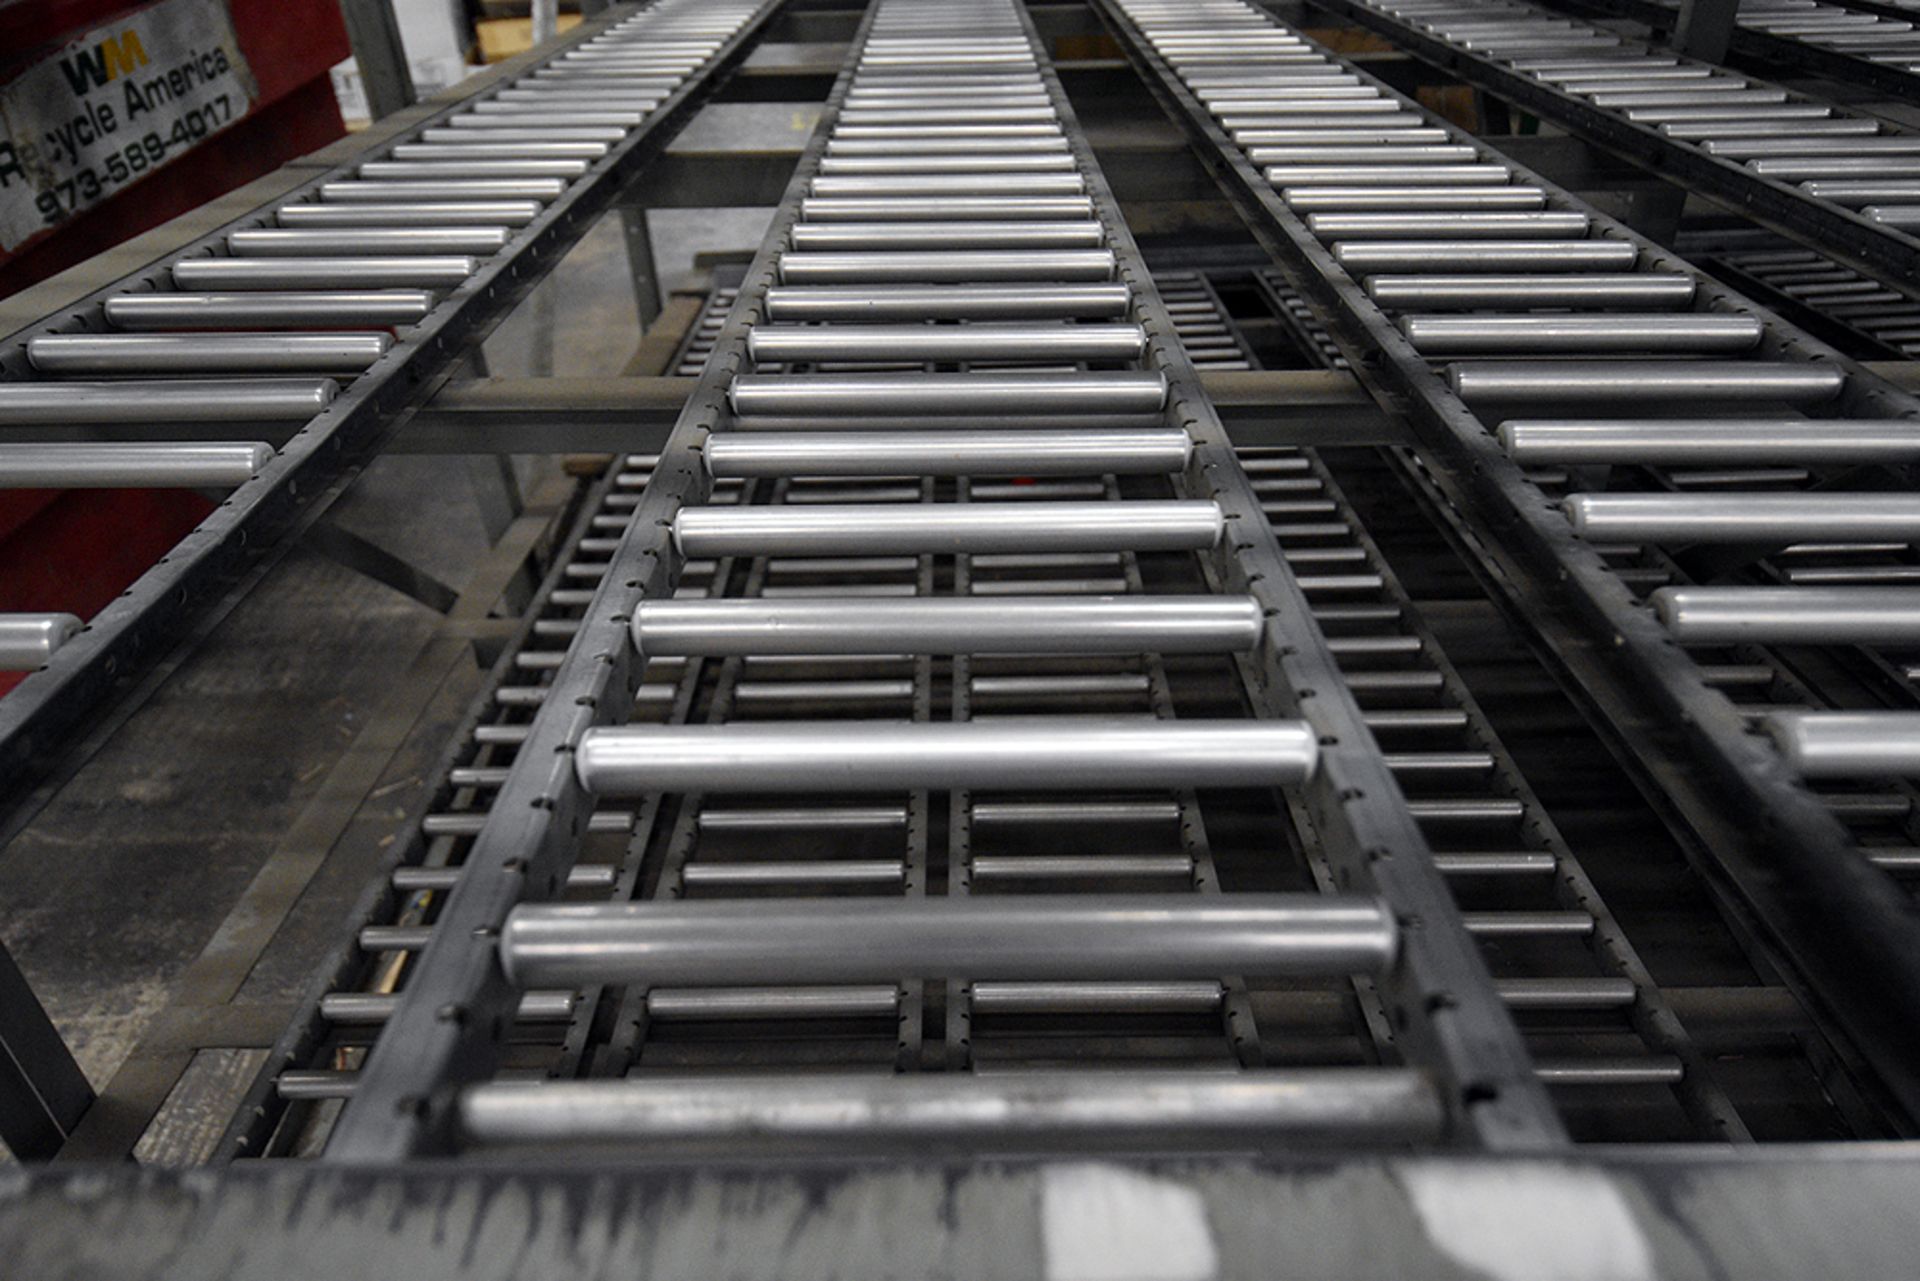 4-Tier Gravity Fed, Carton Flow Rack (132"x300"x95"H) (108"x7" Rollers) - Image 3 of 4